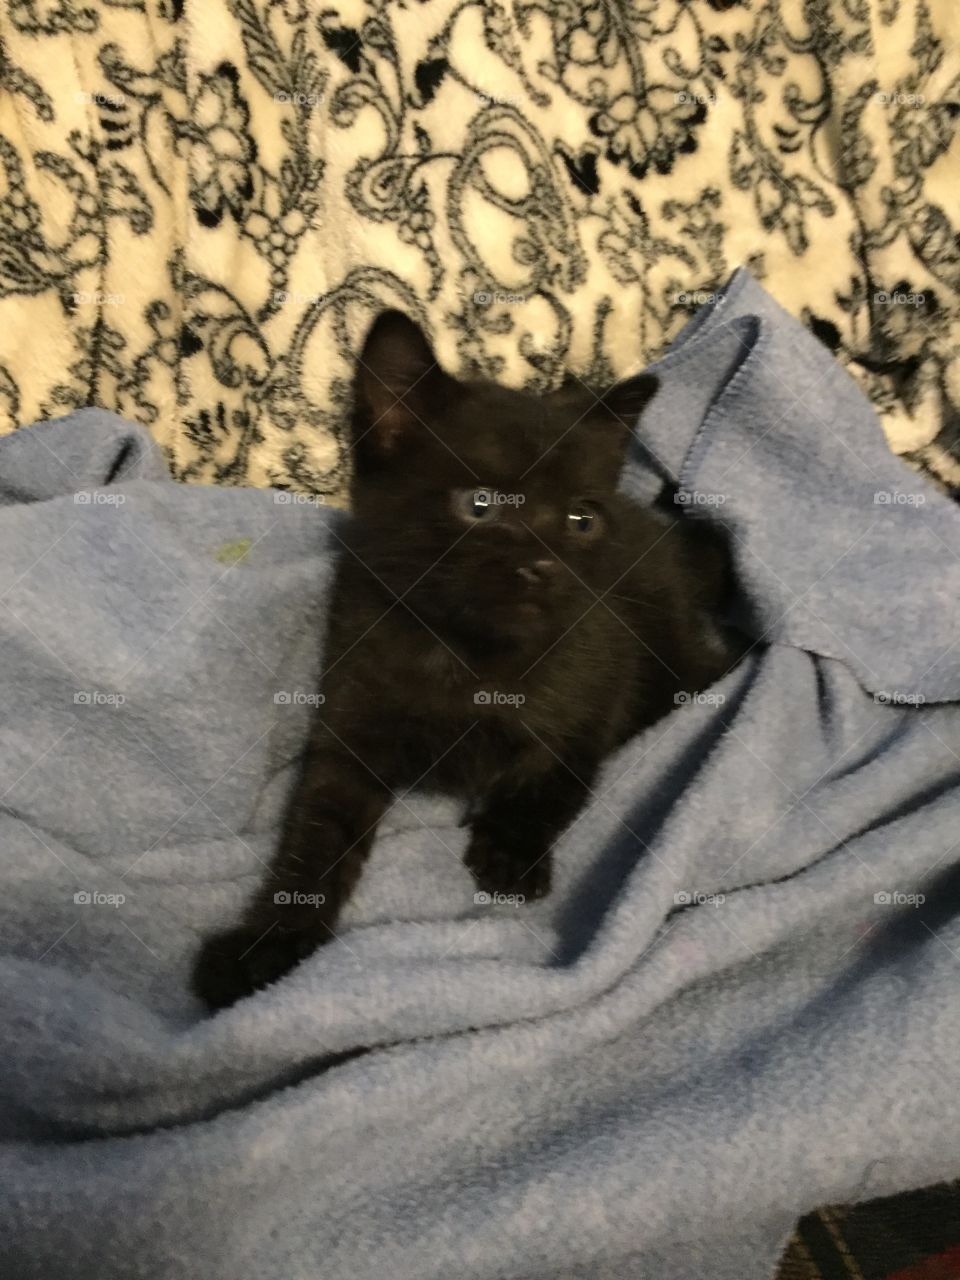 Cute, fuzzy, black orphan kitten looking for his mama.